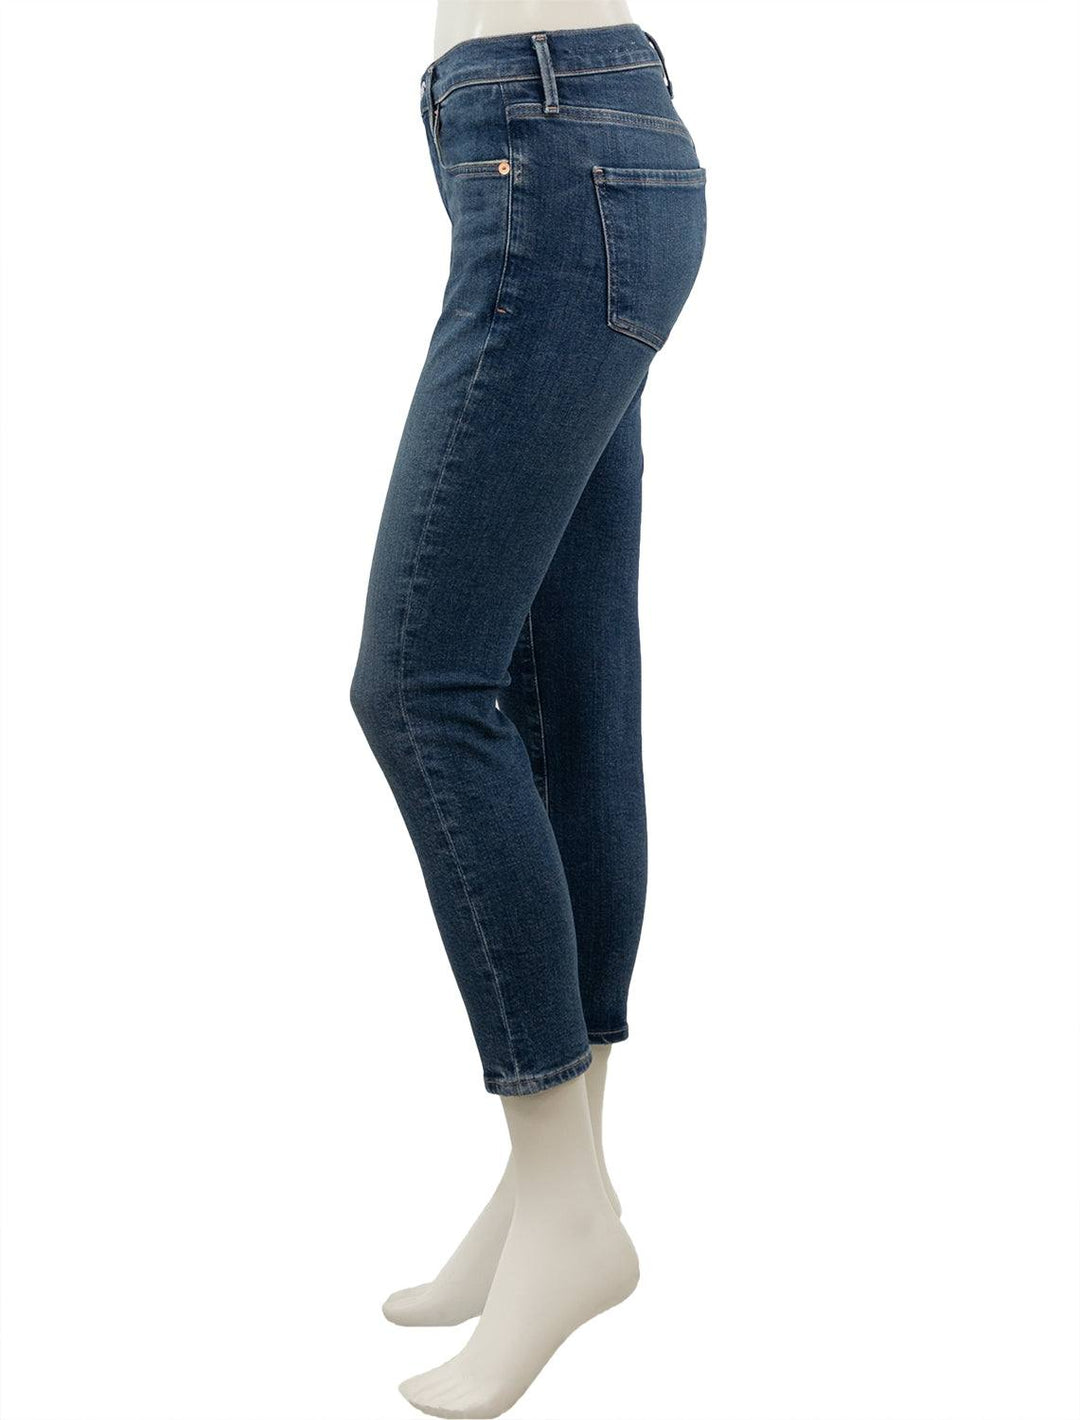 Side view of Front view of Citizen of Humanity's Ella Mid Rise Jeans in Sky Lantern.